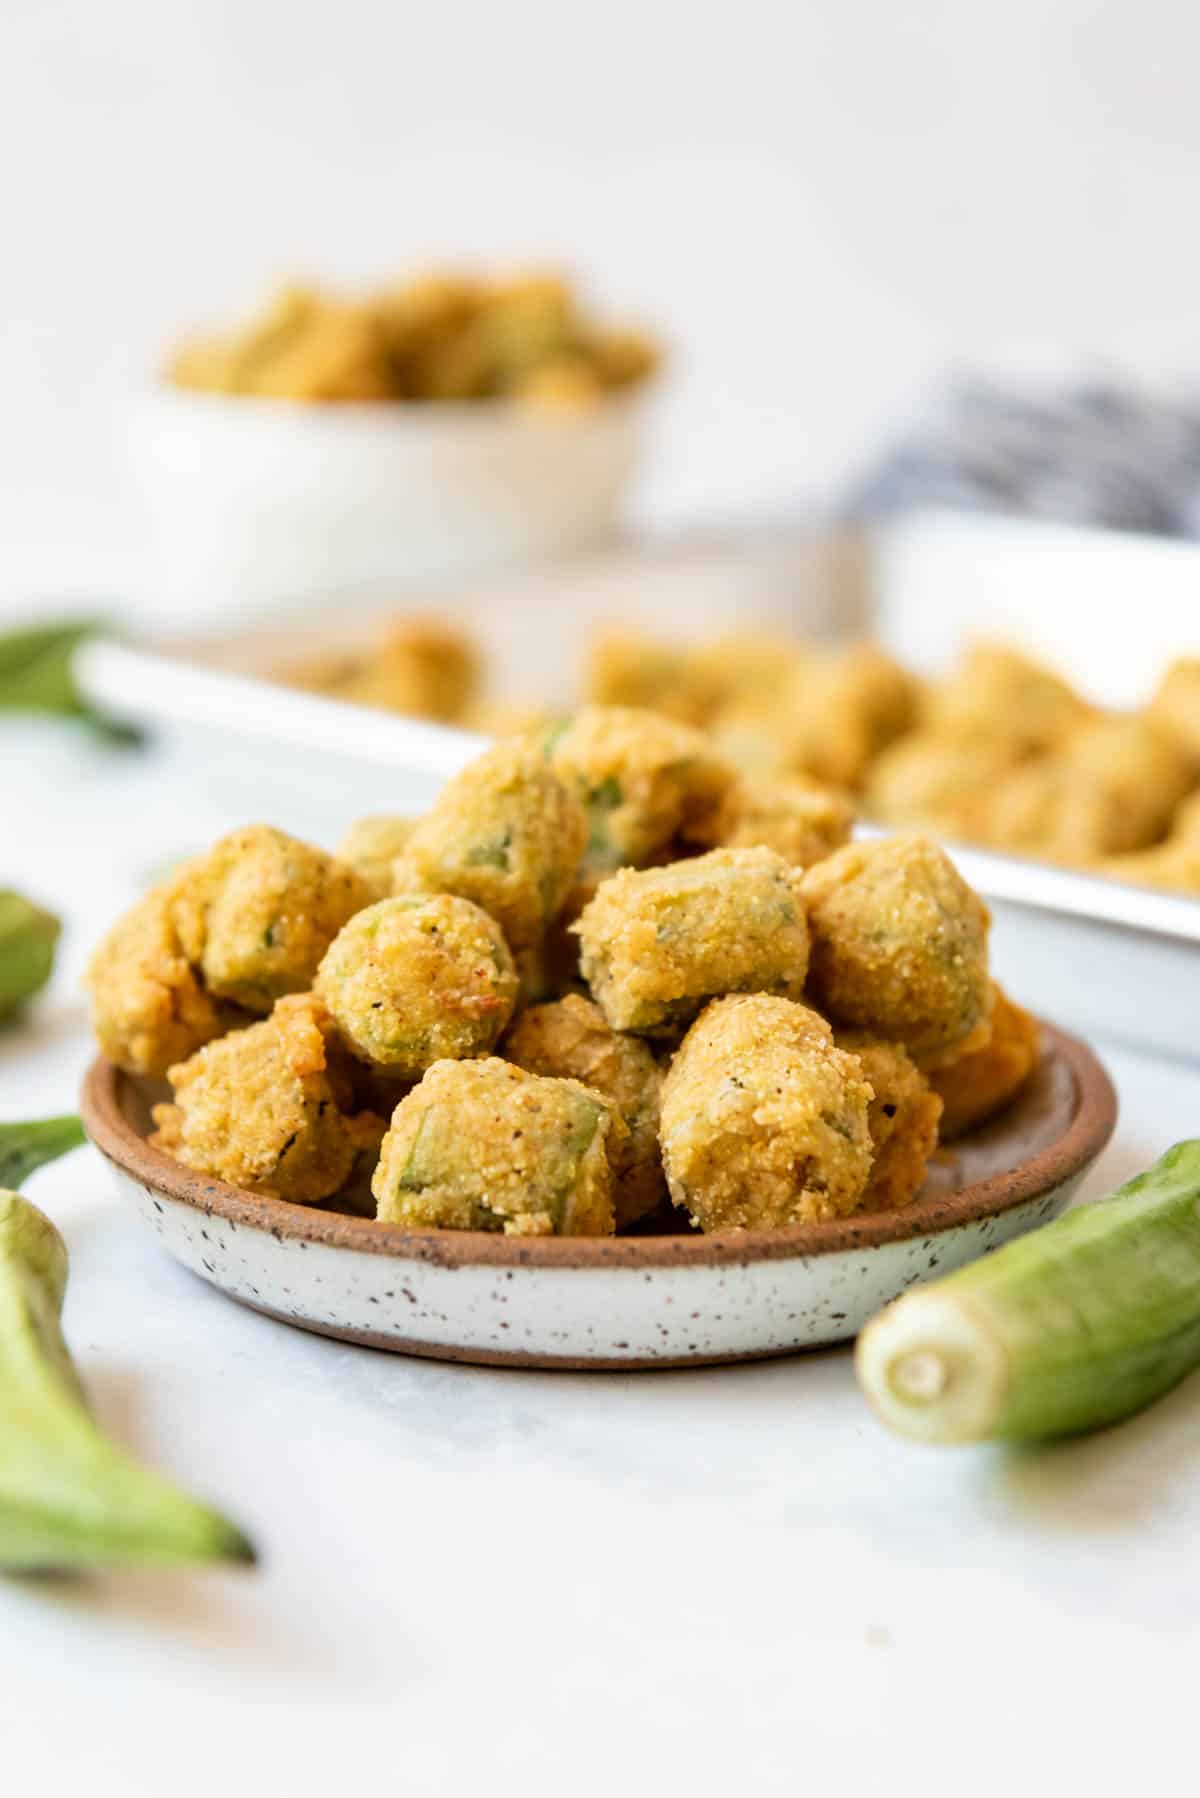 A small plate with a pile of fried okra on it.